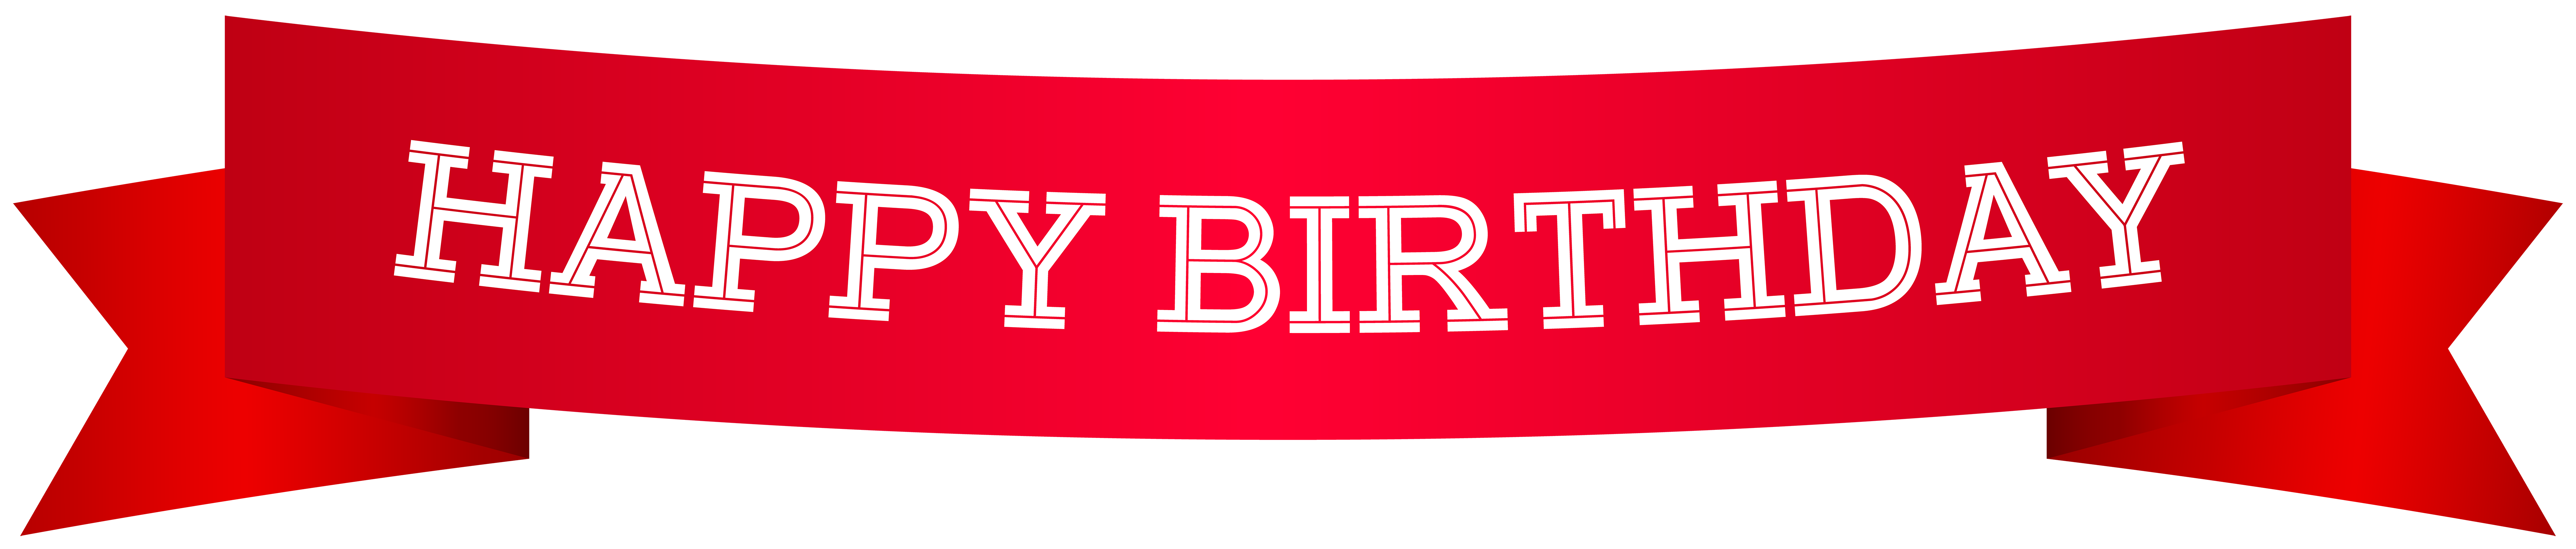 Happy Birthday Banner Red PNG Clip Art Image Quality Image And Transparent PNG Free Clipart